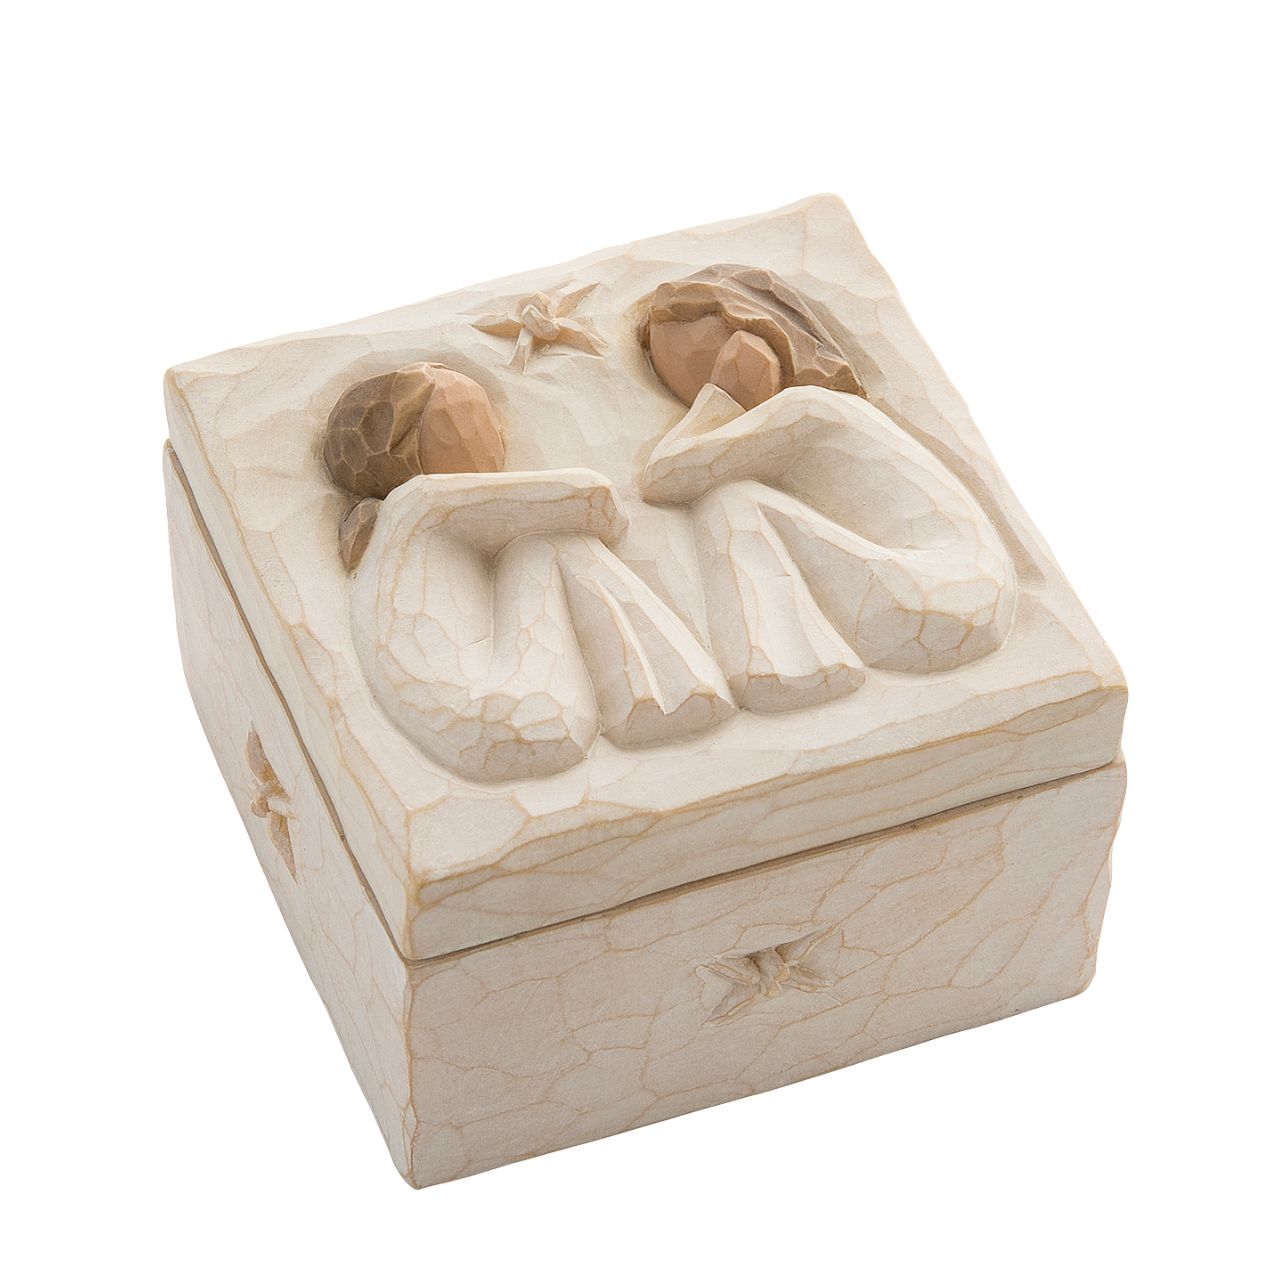 Friendship Keepsake Box by Willow Tree  Keepsake Boxes are small, sweet places to keep treasures. Just the right size for jewellery. Hand-painted bas-relief lids are not attached. Inside, the bottom of this box reveals the sentiment, "Forever true, forever friends".